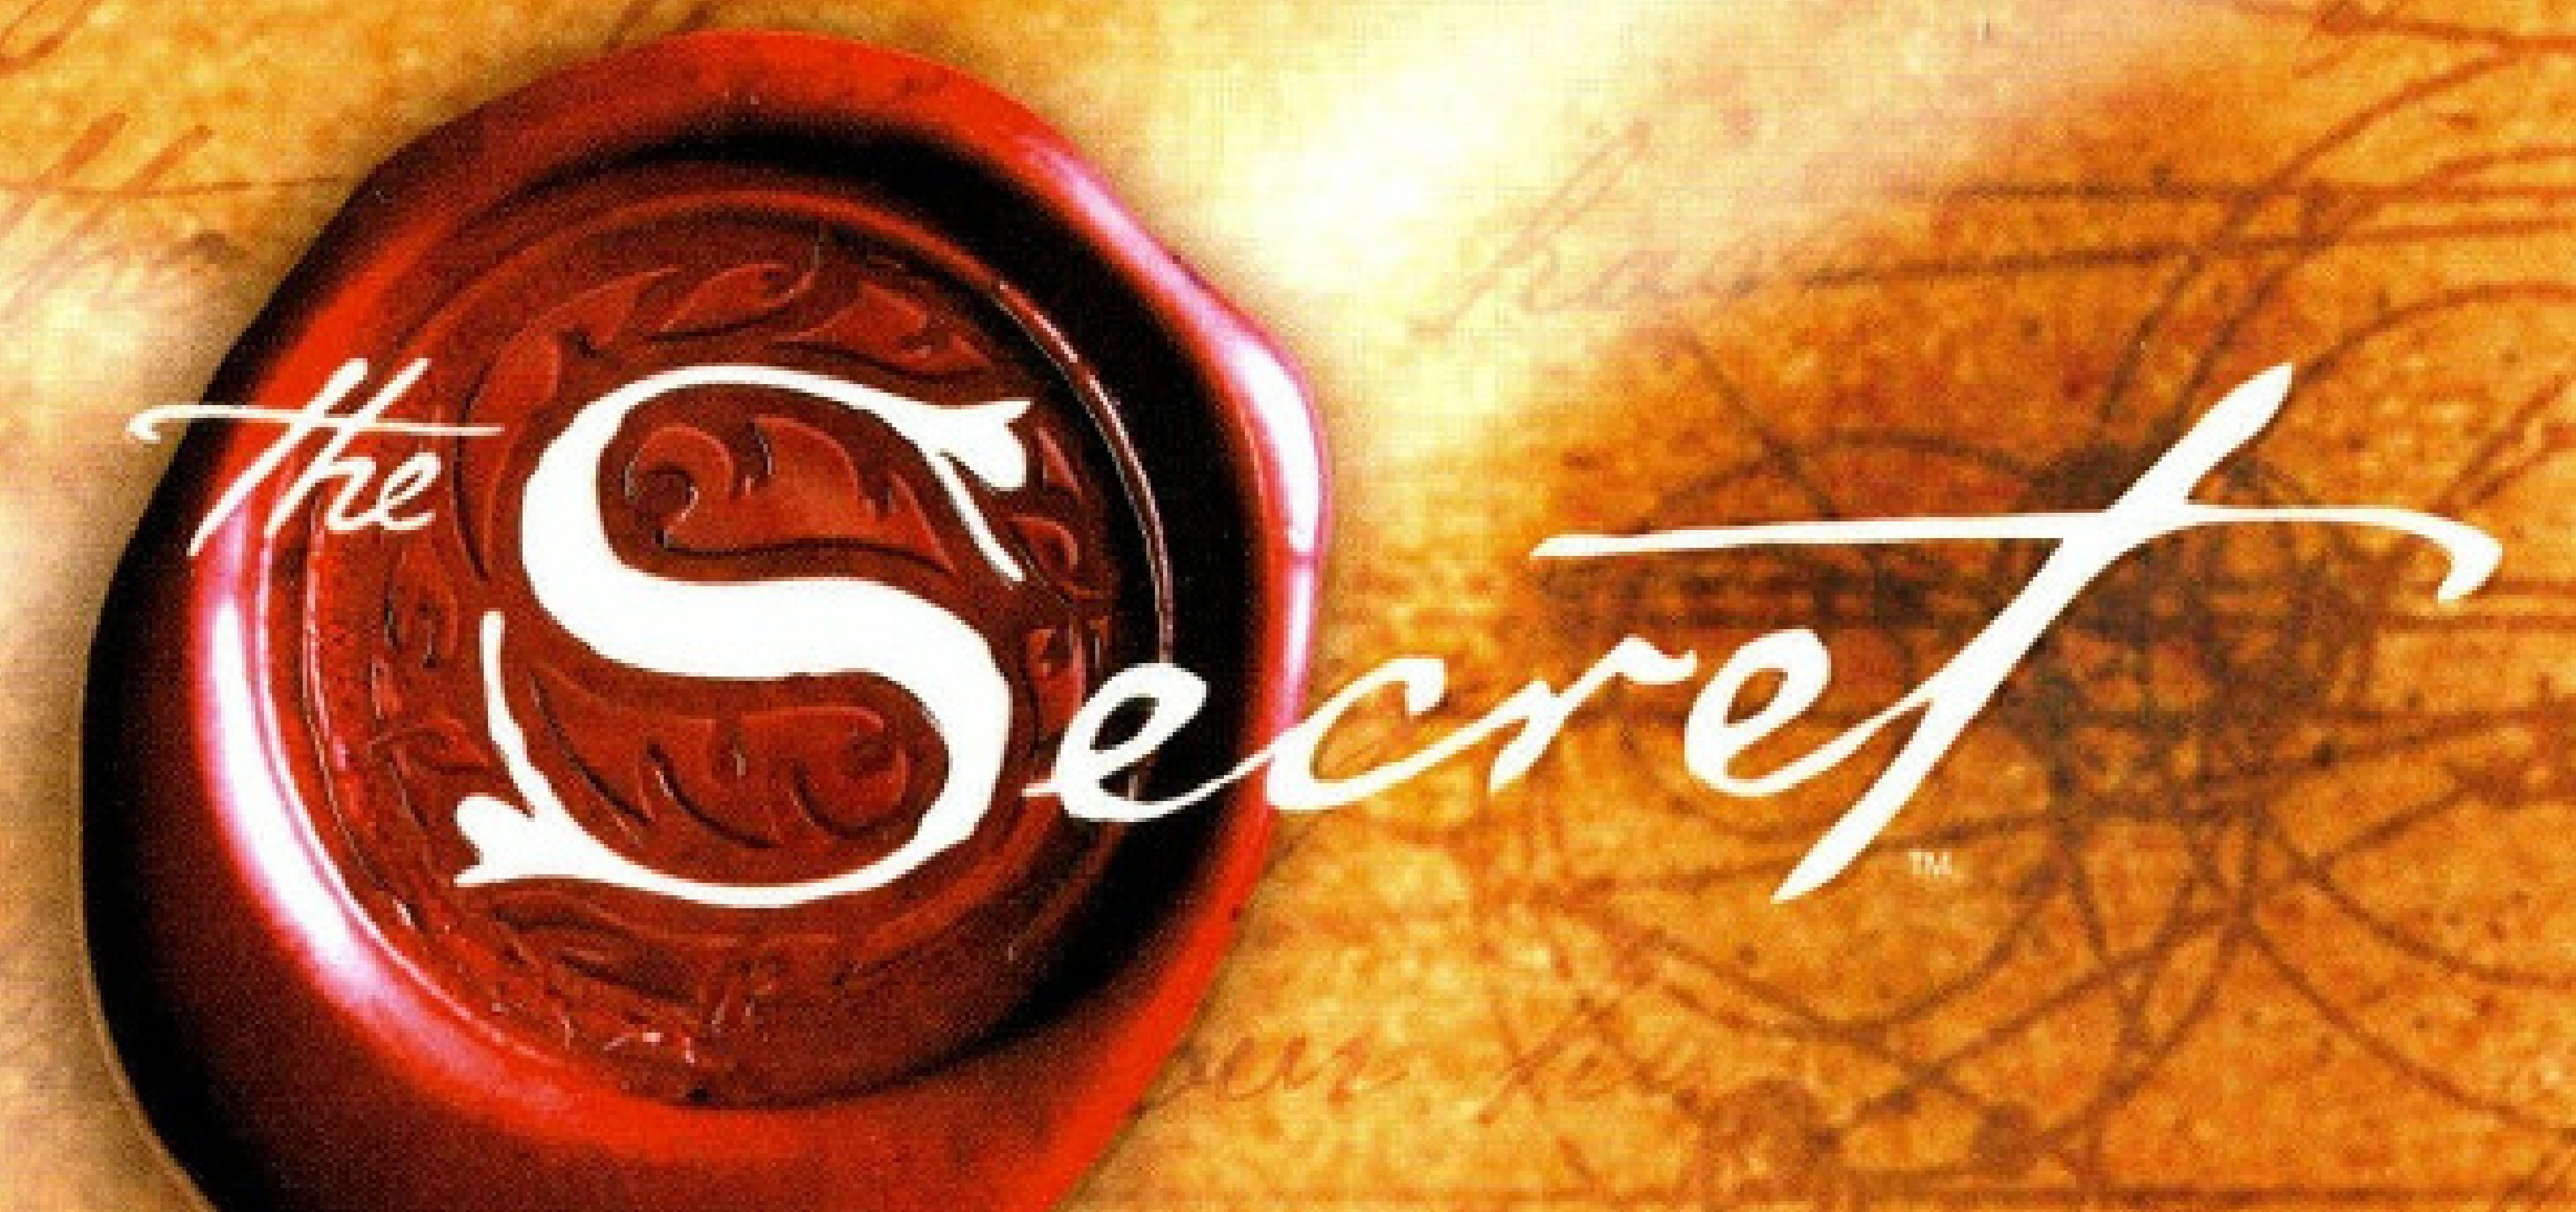 The Secret, Book by Rhonda Byrne, Official Publisher Page